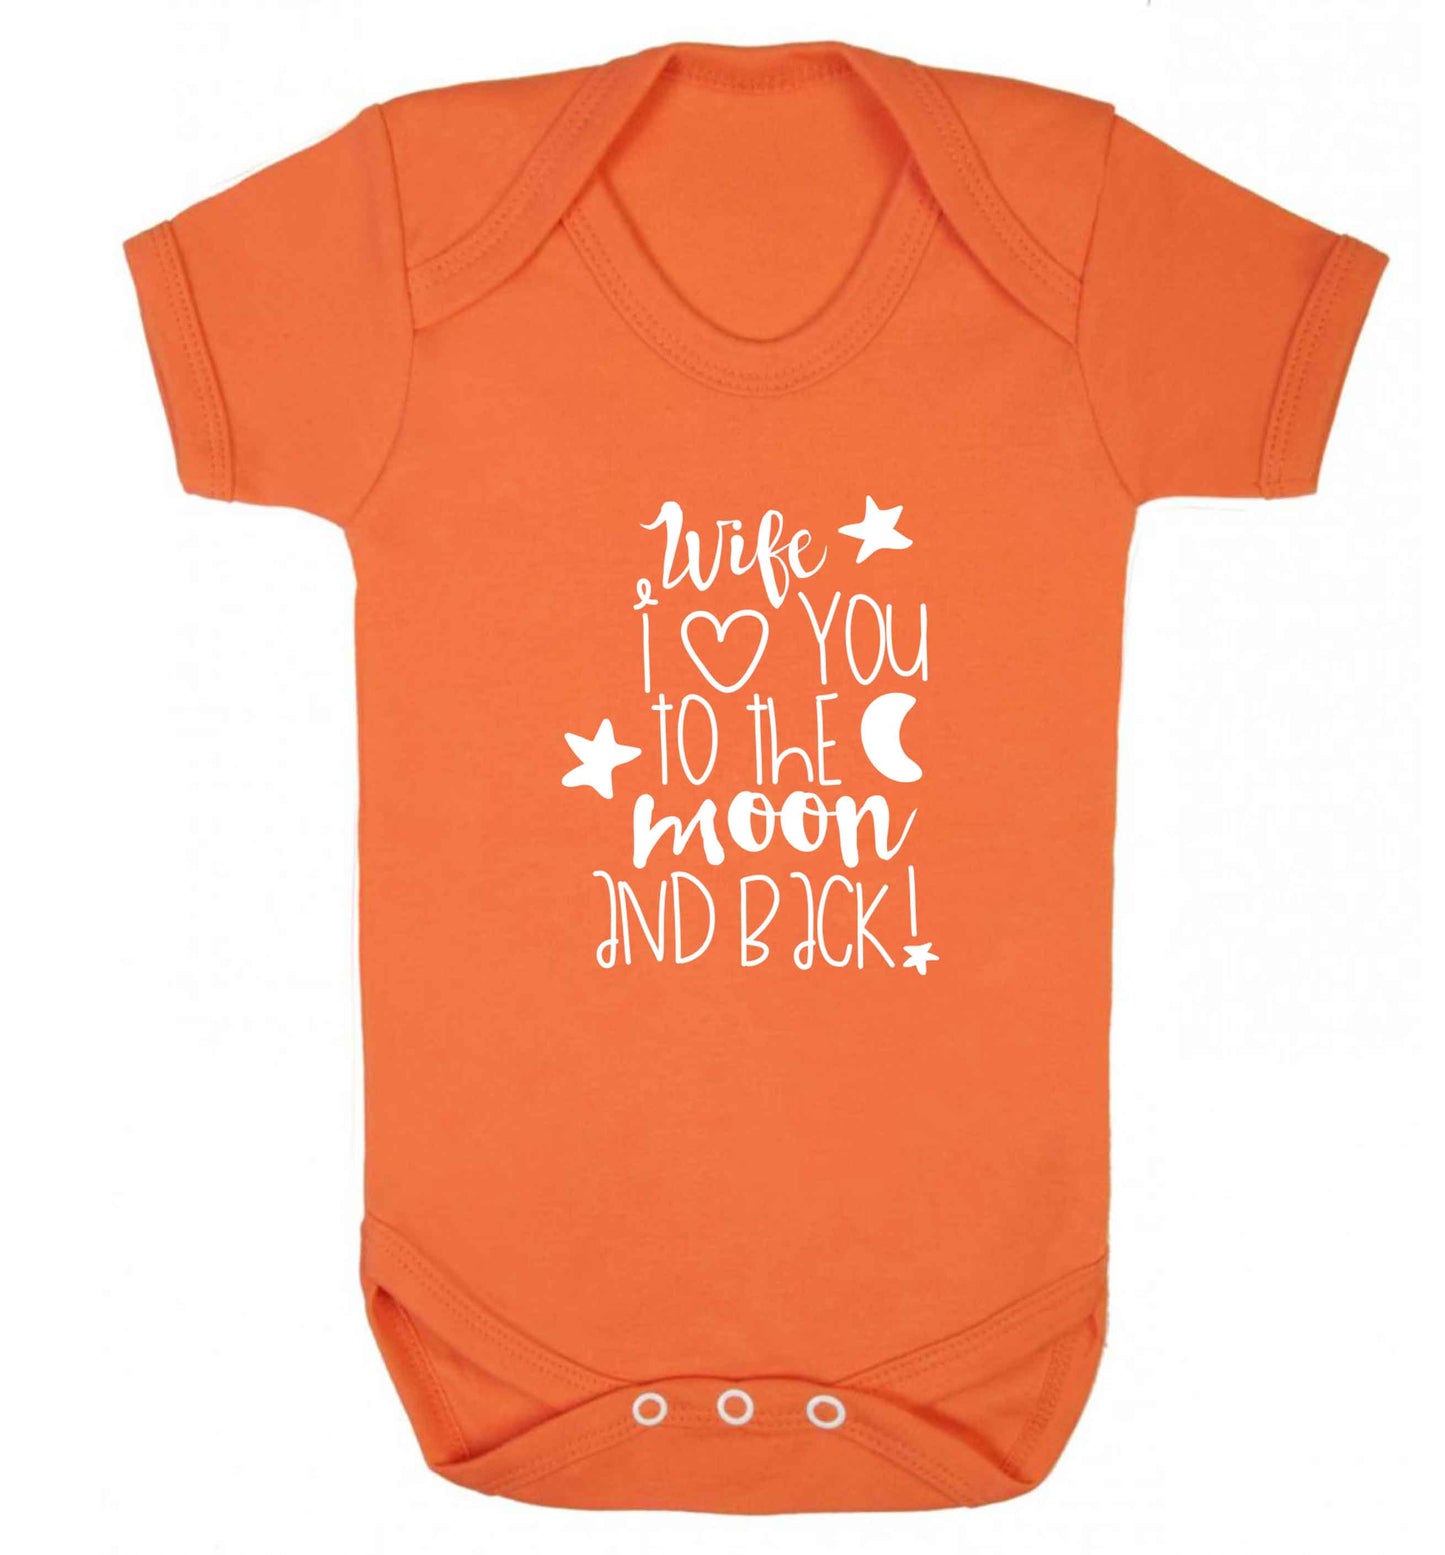 Wife I love you to the moon and back baby vest orange 18-24 months